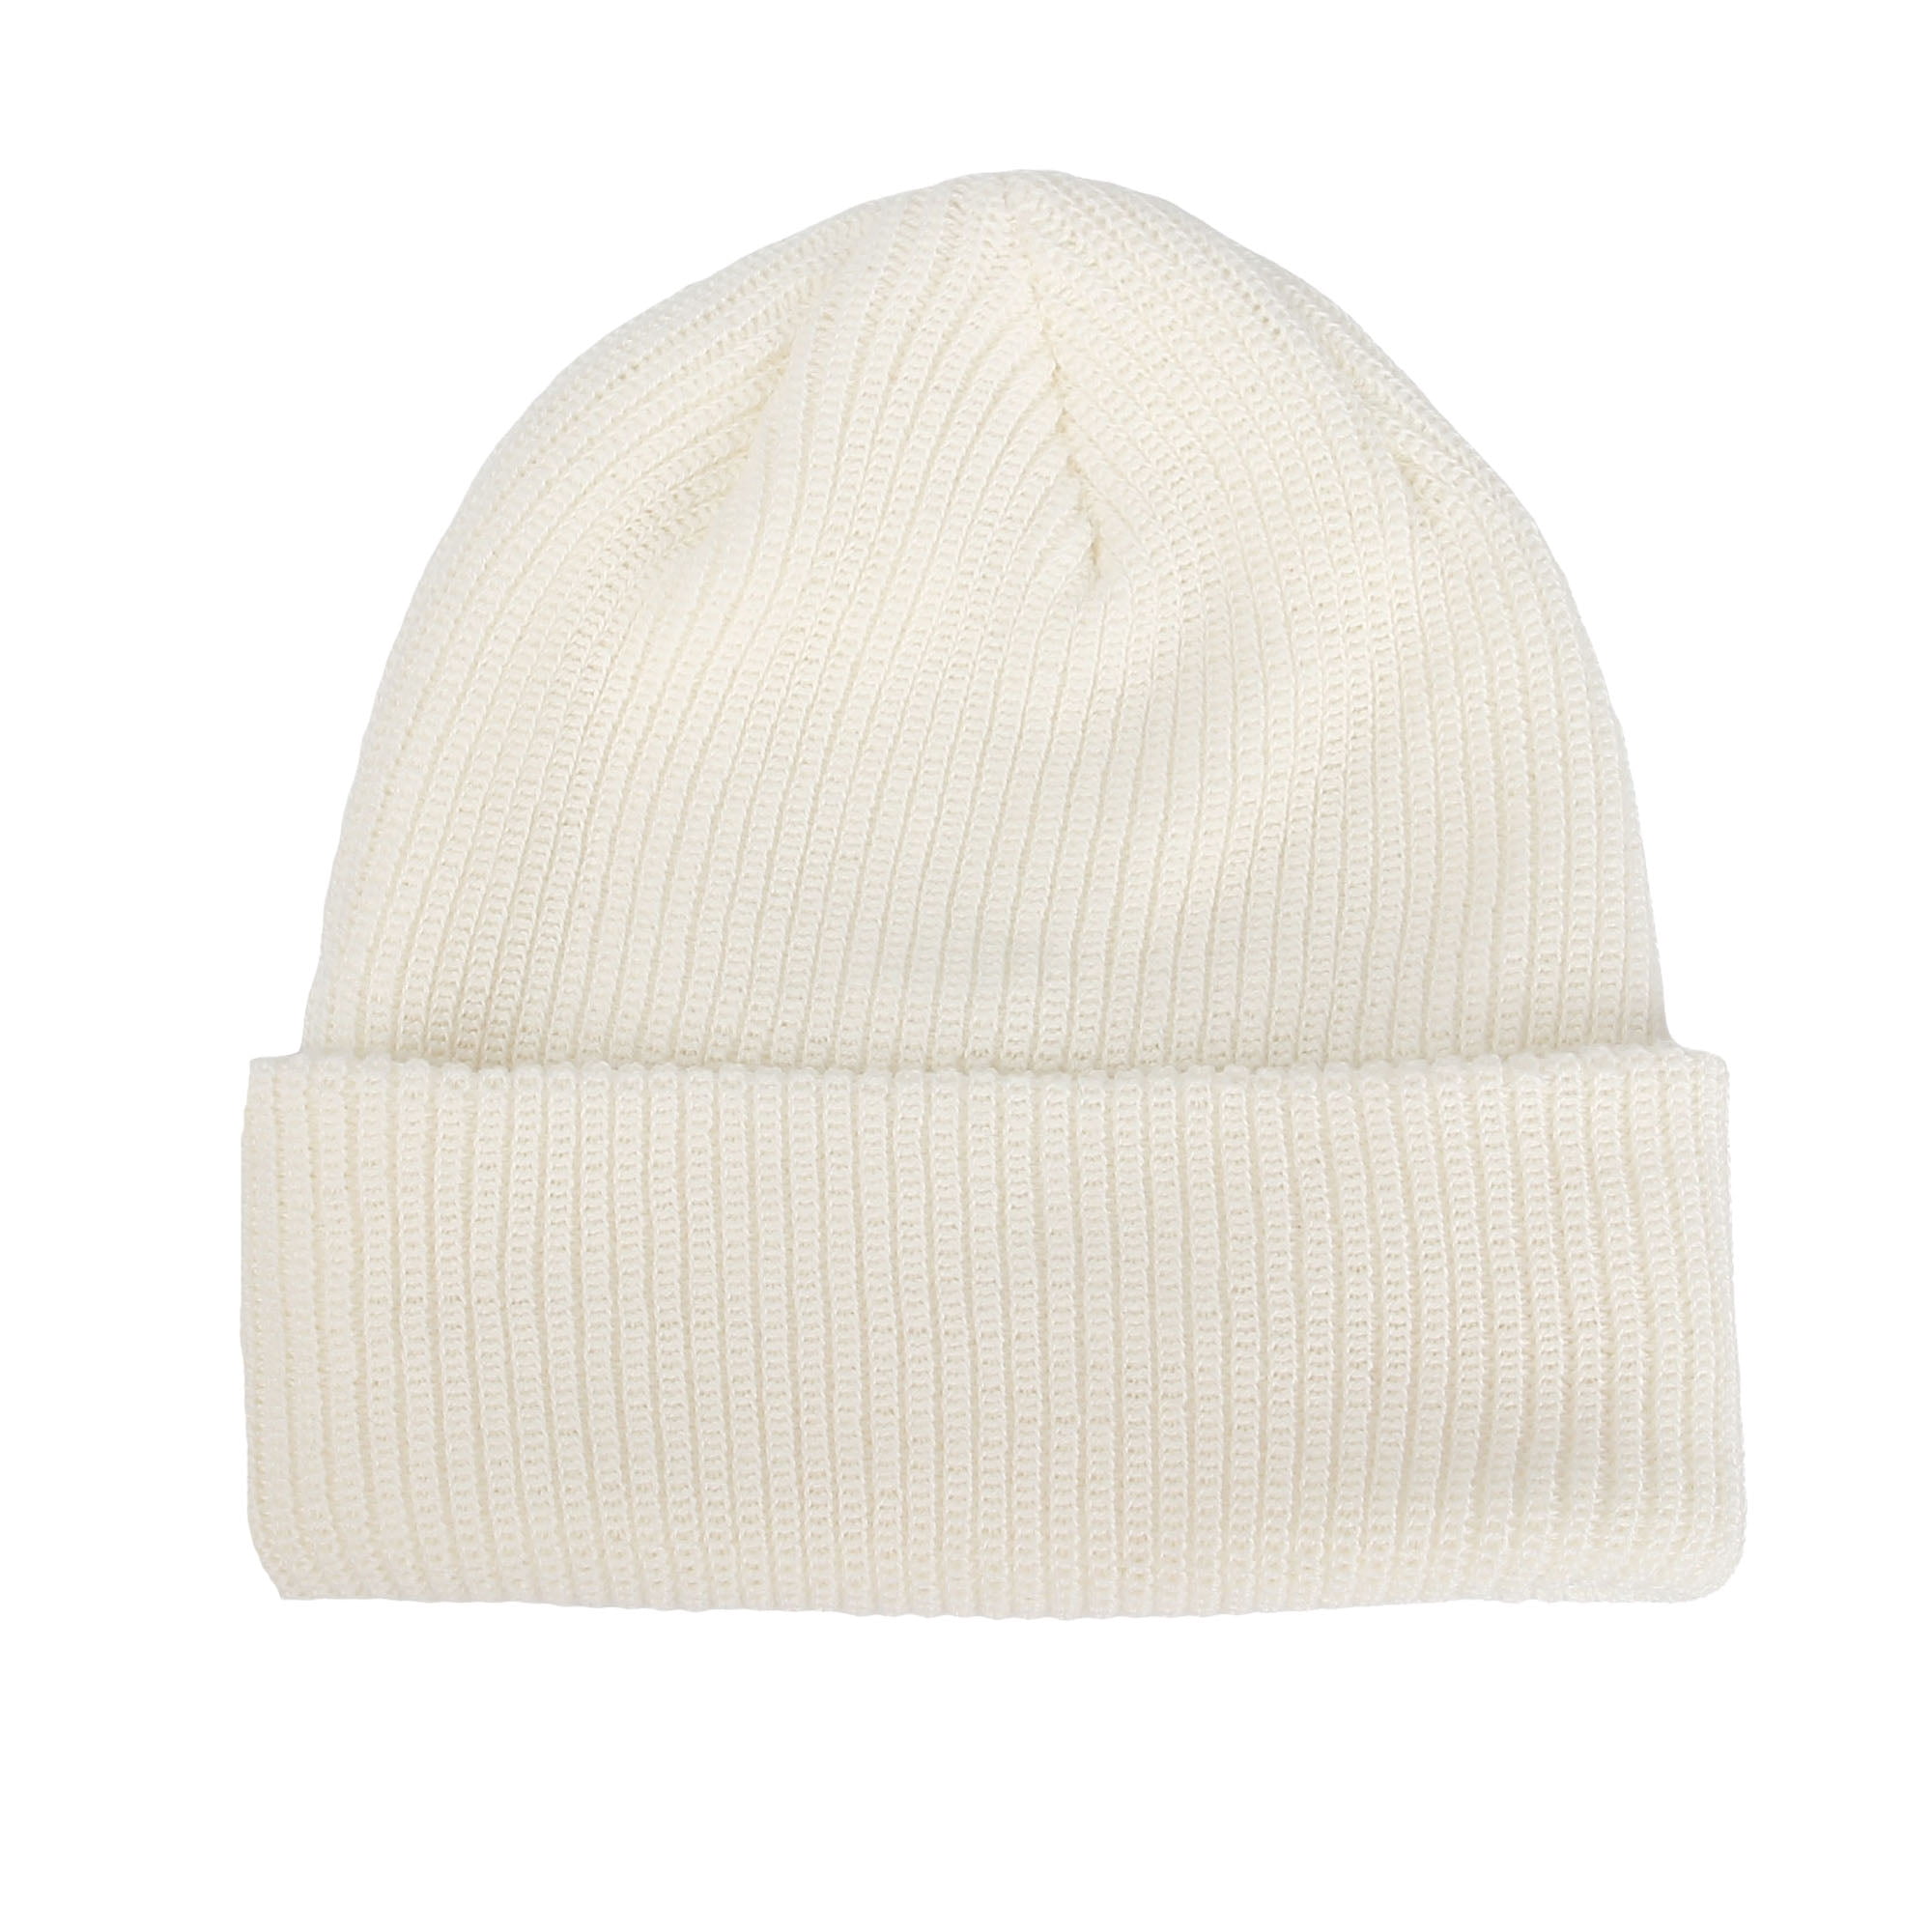 WITHMOONS Ribbed Cotton Beanie Hat Summer Color Solid Watch Cap ZE51183 ...